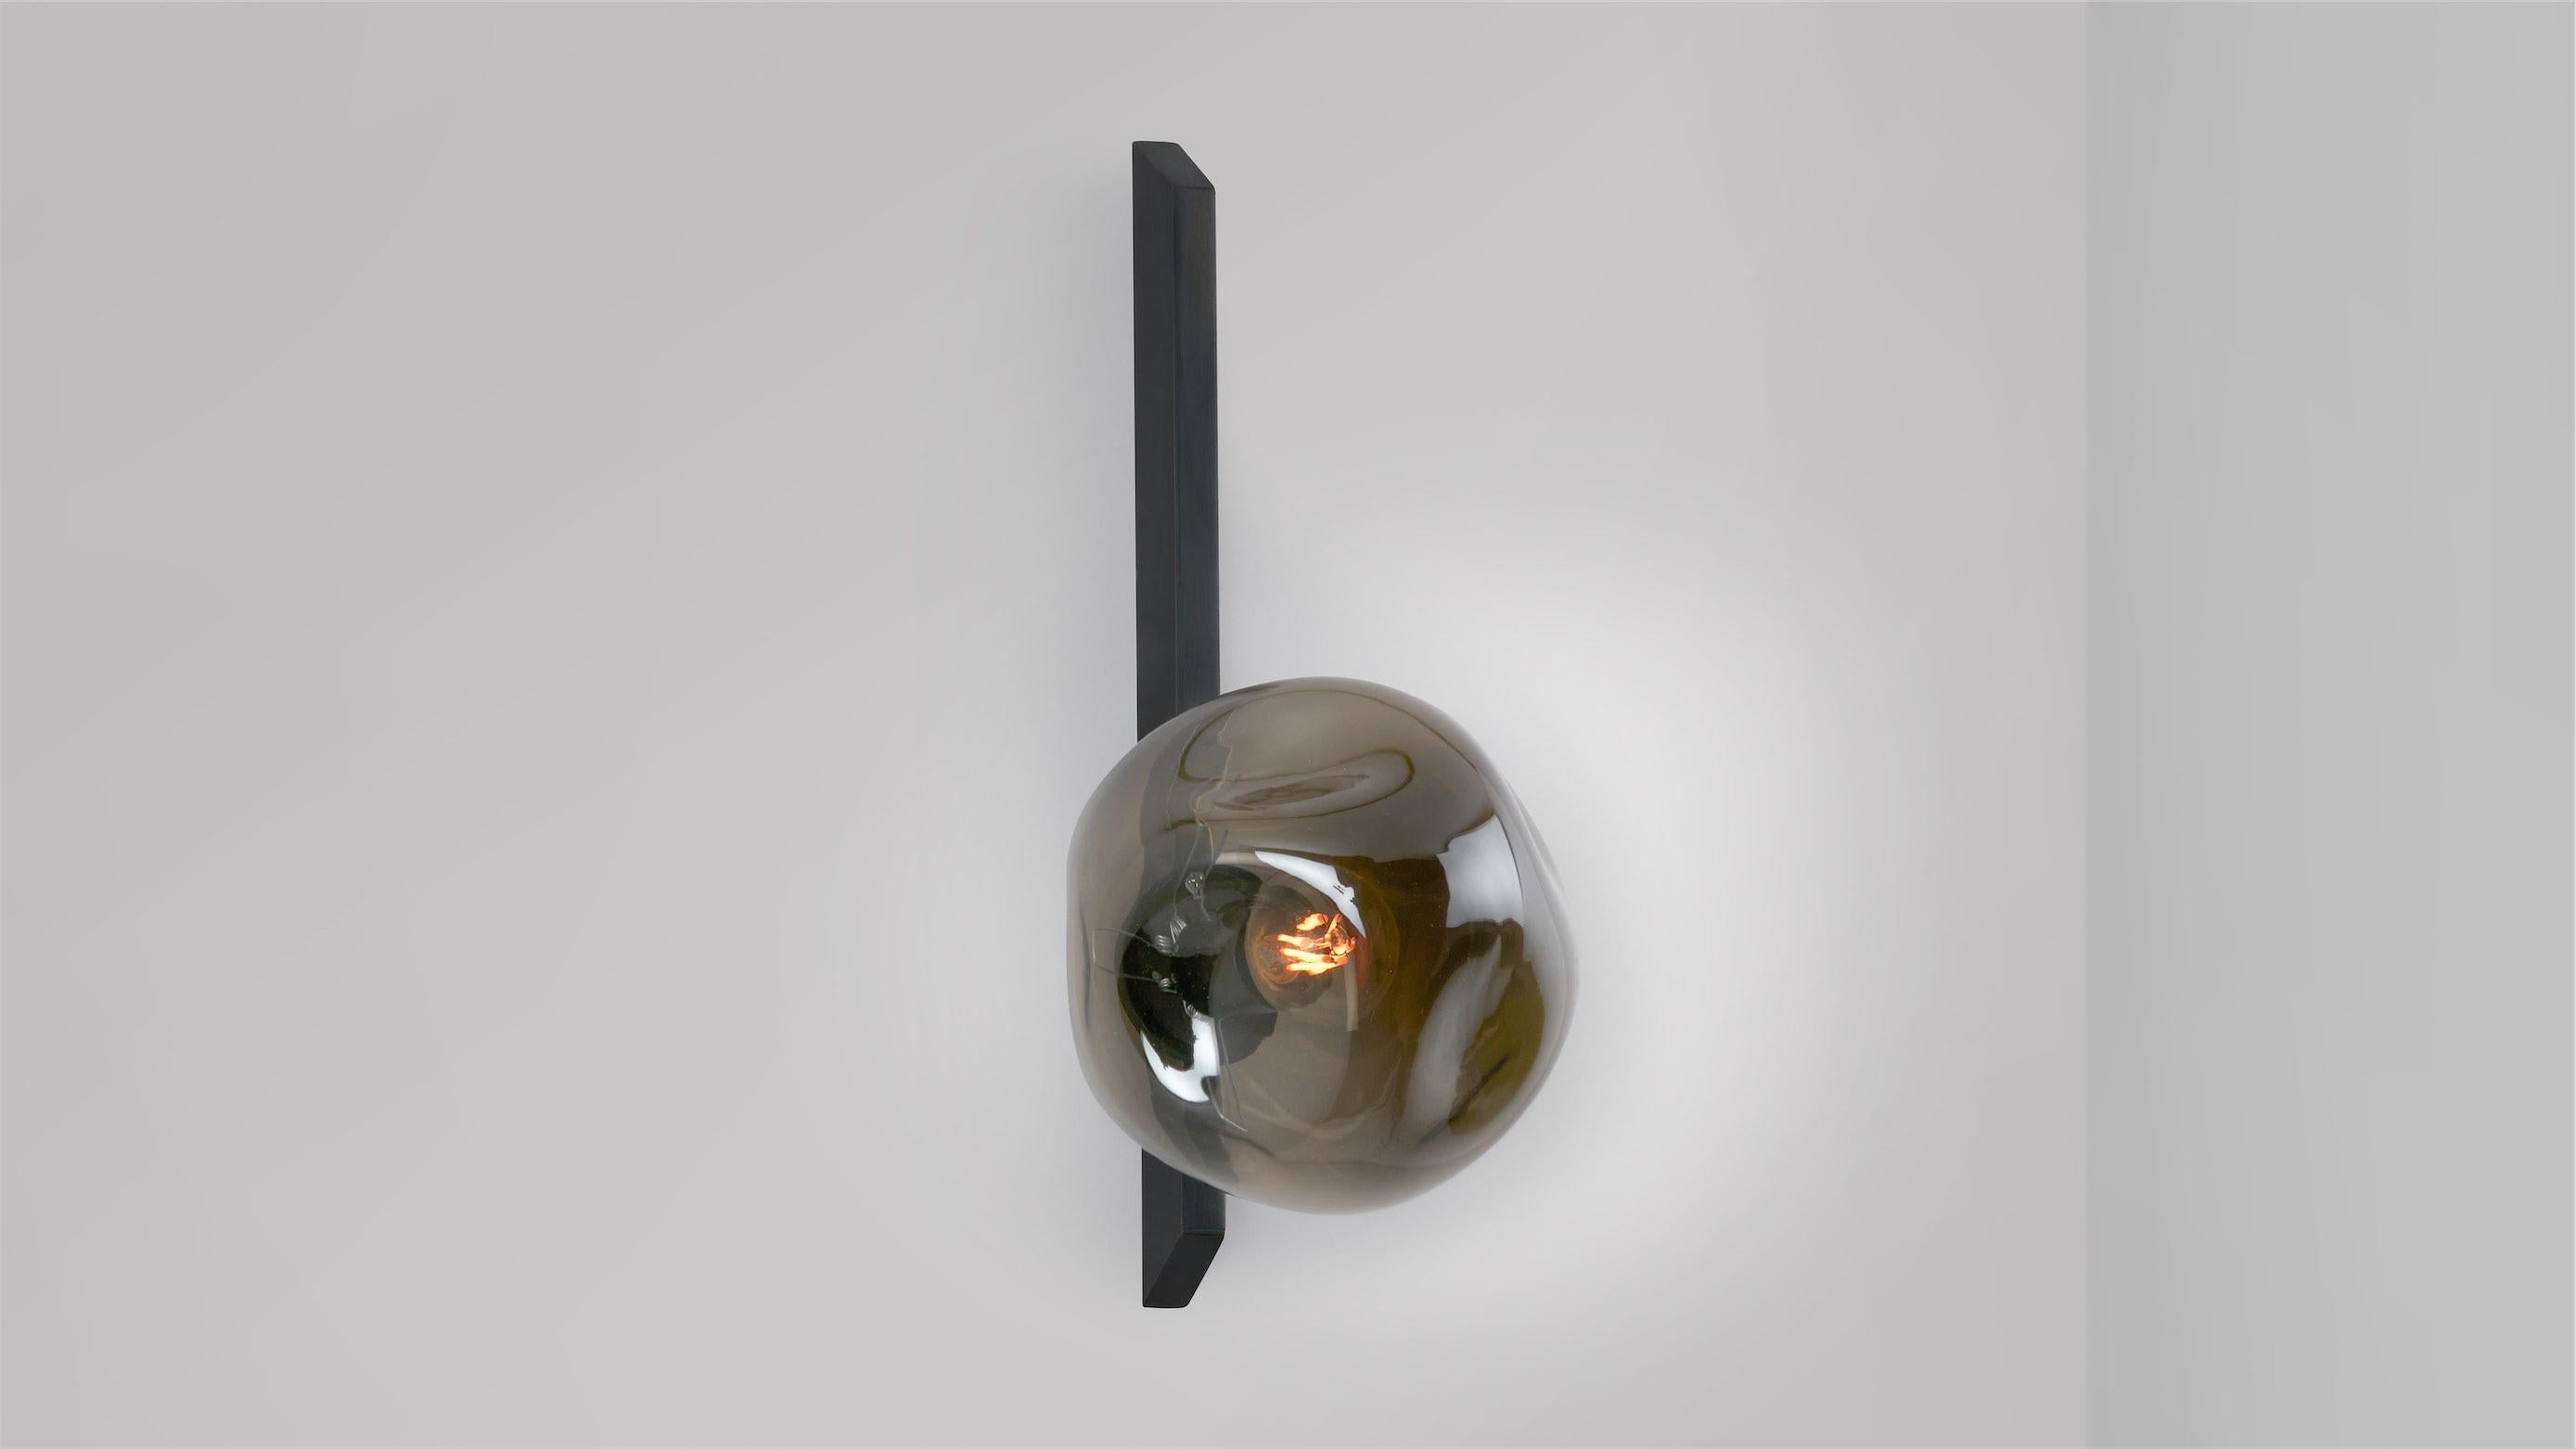 Tall Gaia wall lamp by CTO Lighting
Materials: Bronze with hand-shaped smoked glass.
Dimensions: D 18.3 x W 15 x H 35 cm
Available in bronze or satin brass and in hand shaped smoke glass, matte opal glass, shiny opal glass, or tinted glass. 

An